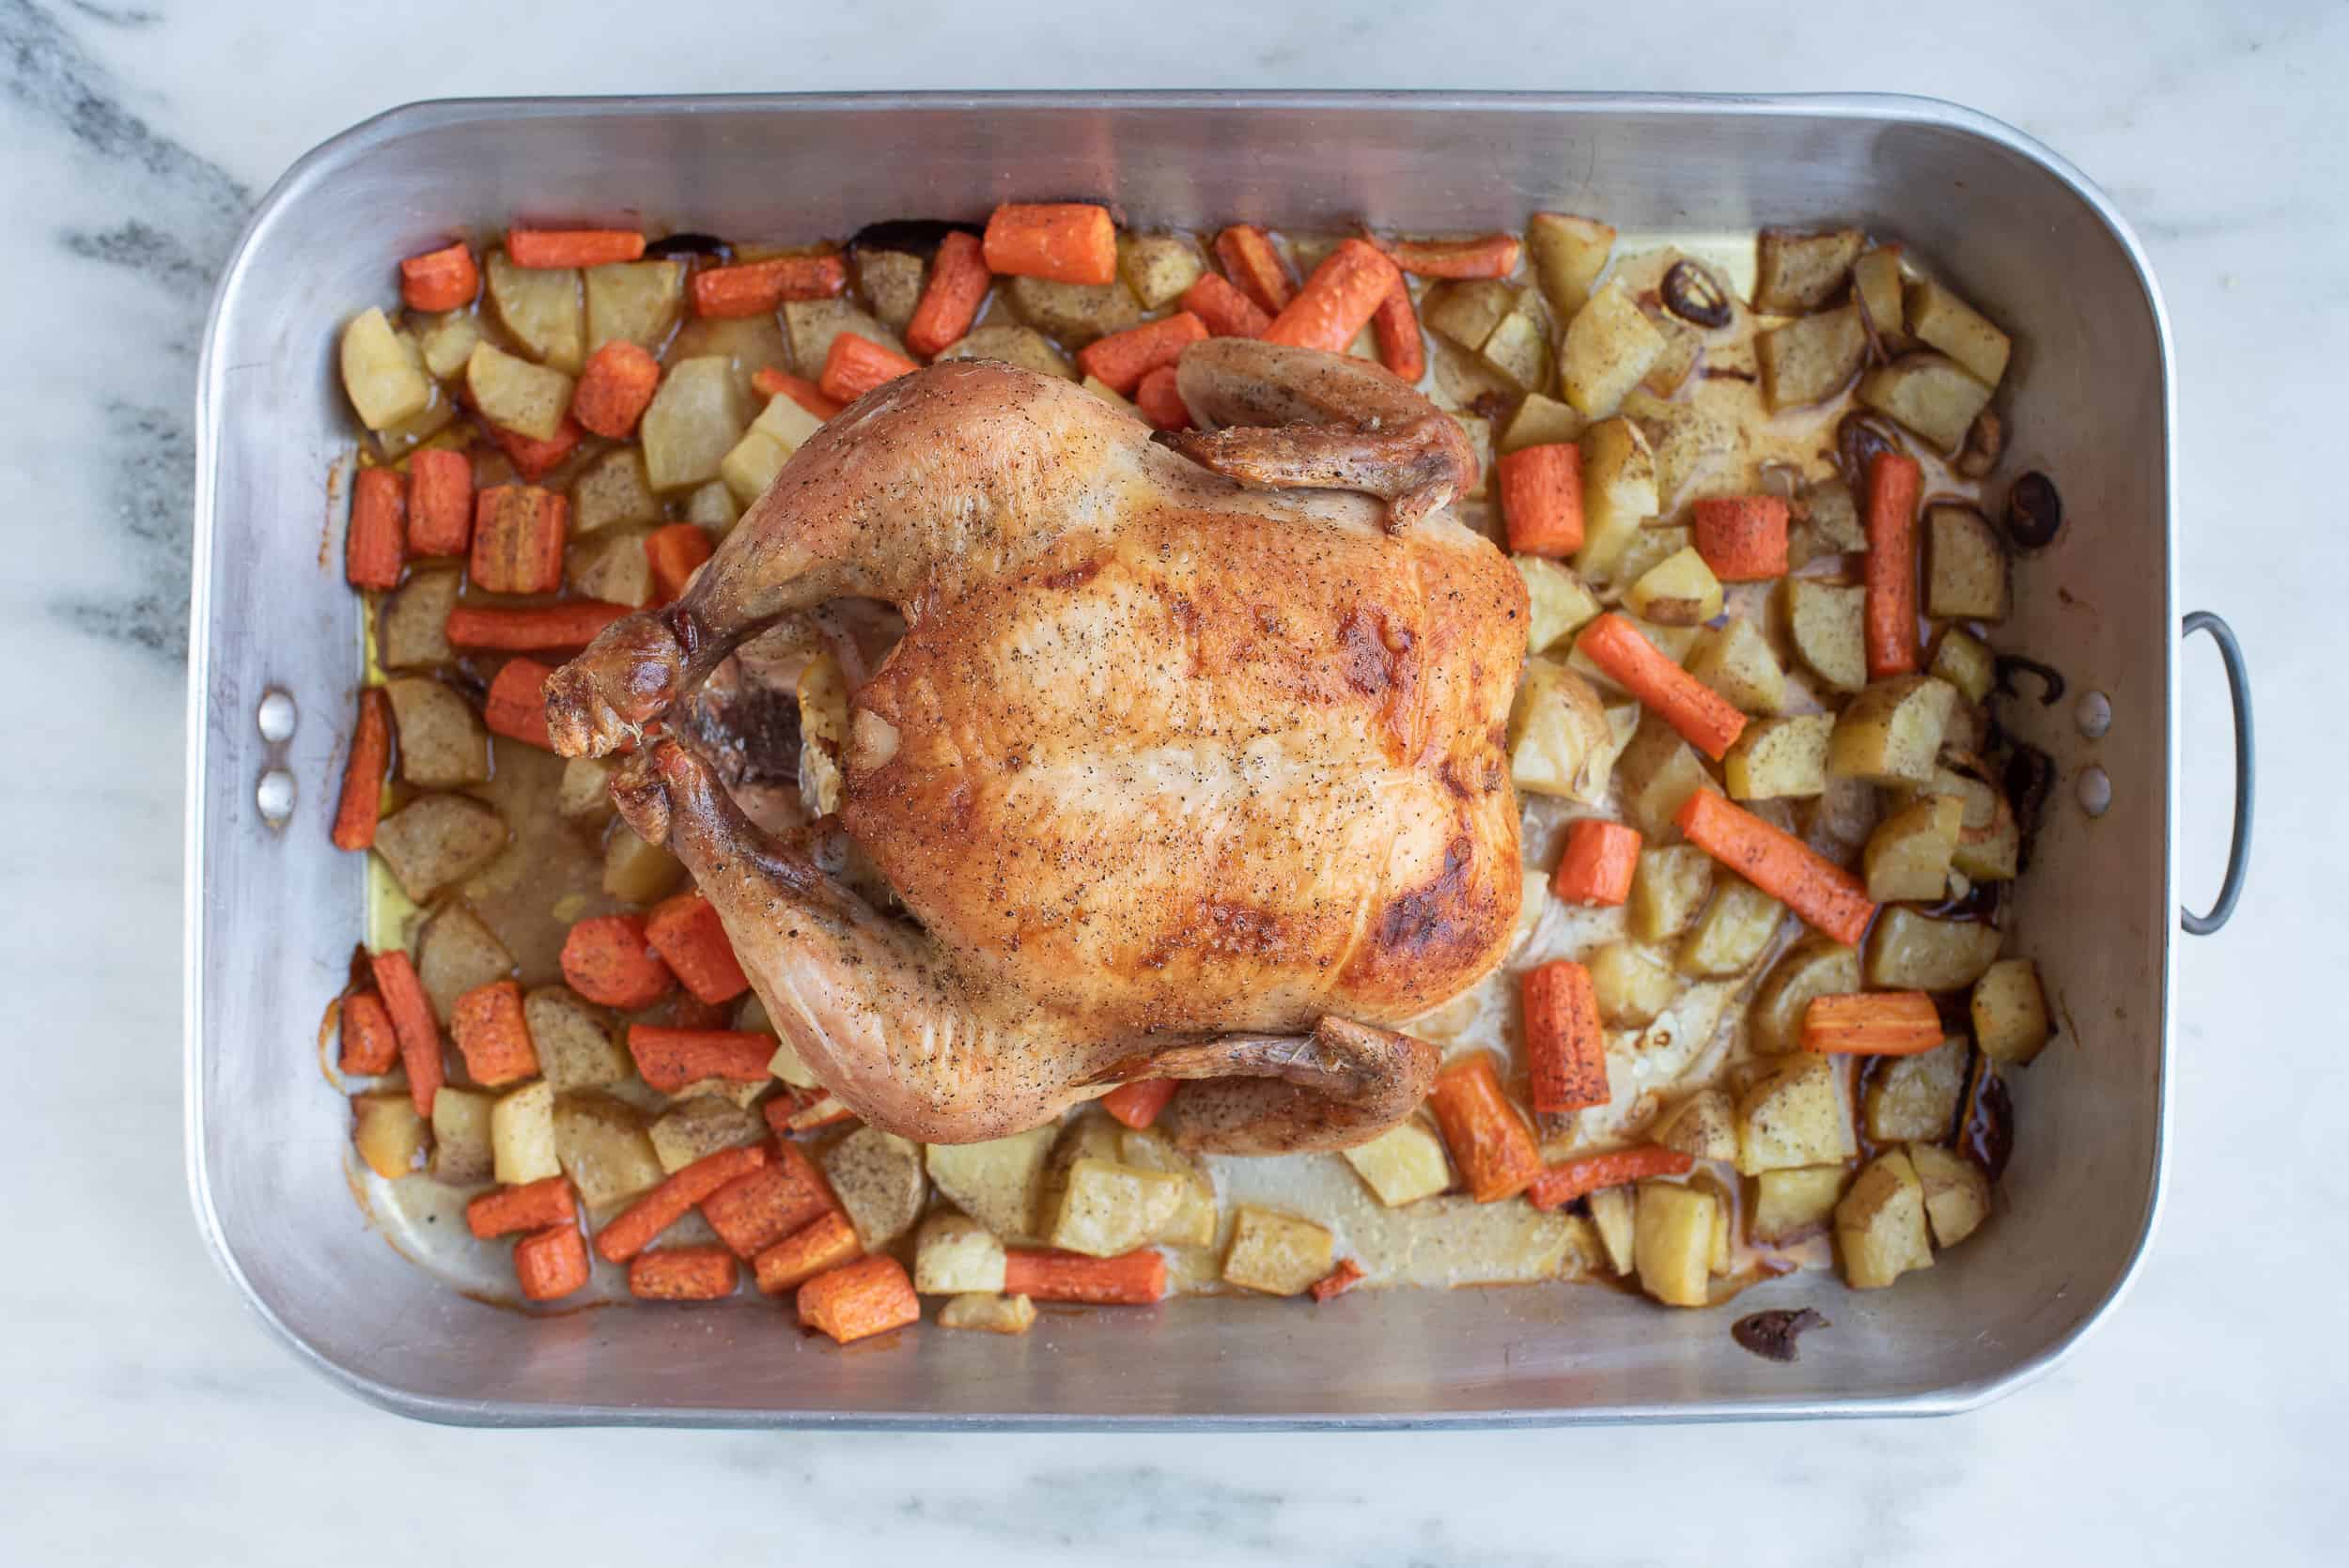 whole roasted chicken in a pan with cut up carrots and potatoes